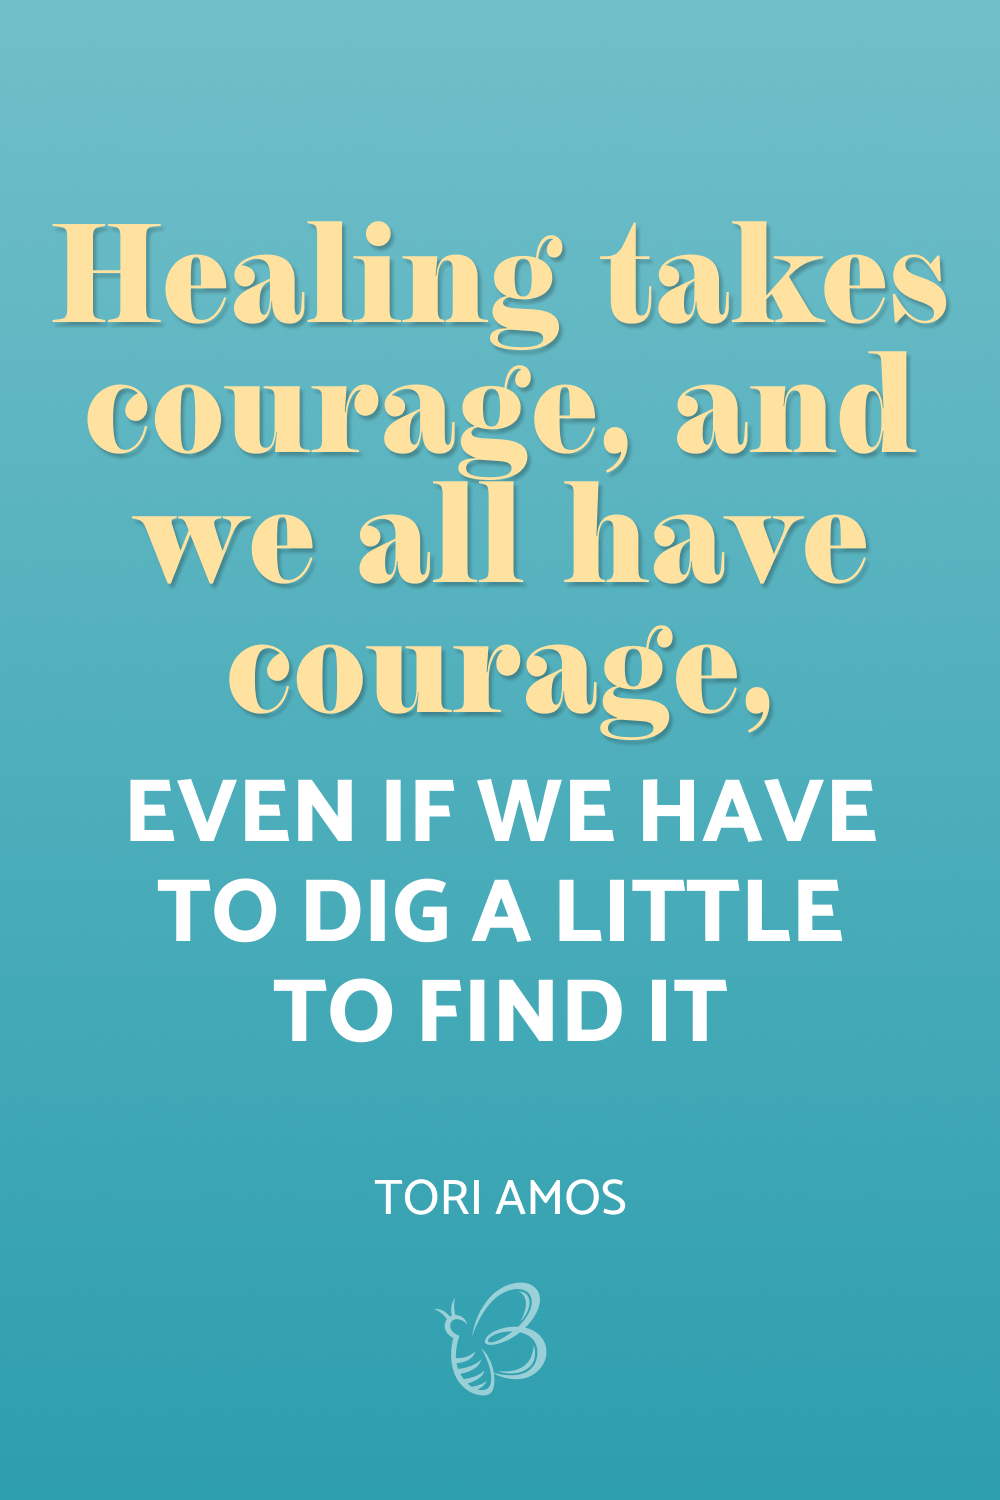 Healing takes courage, and we all have courage, even if we have to dig a little to find it